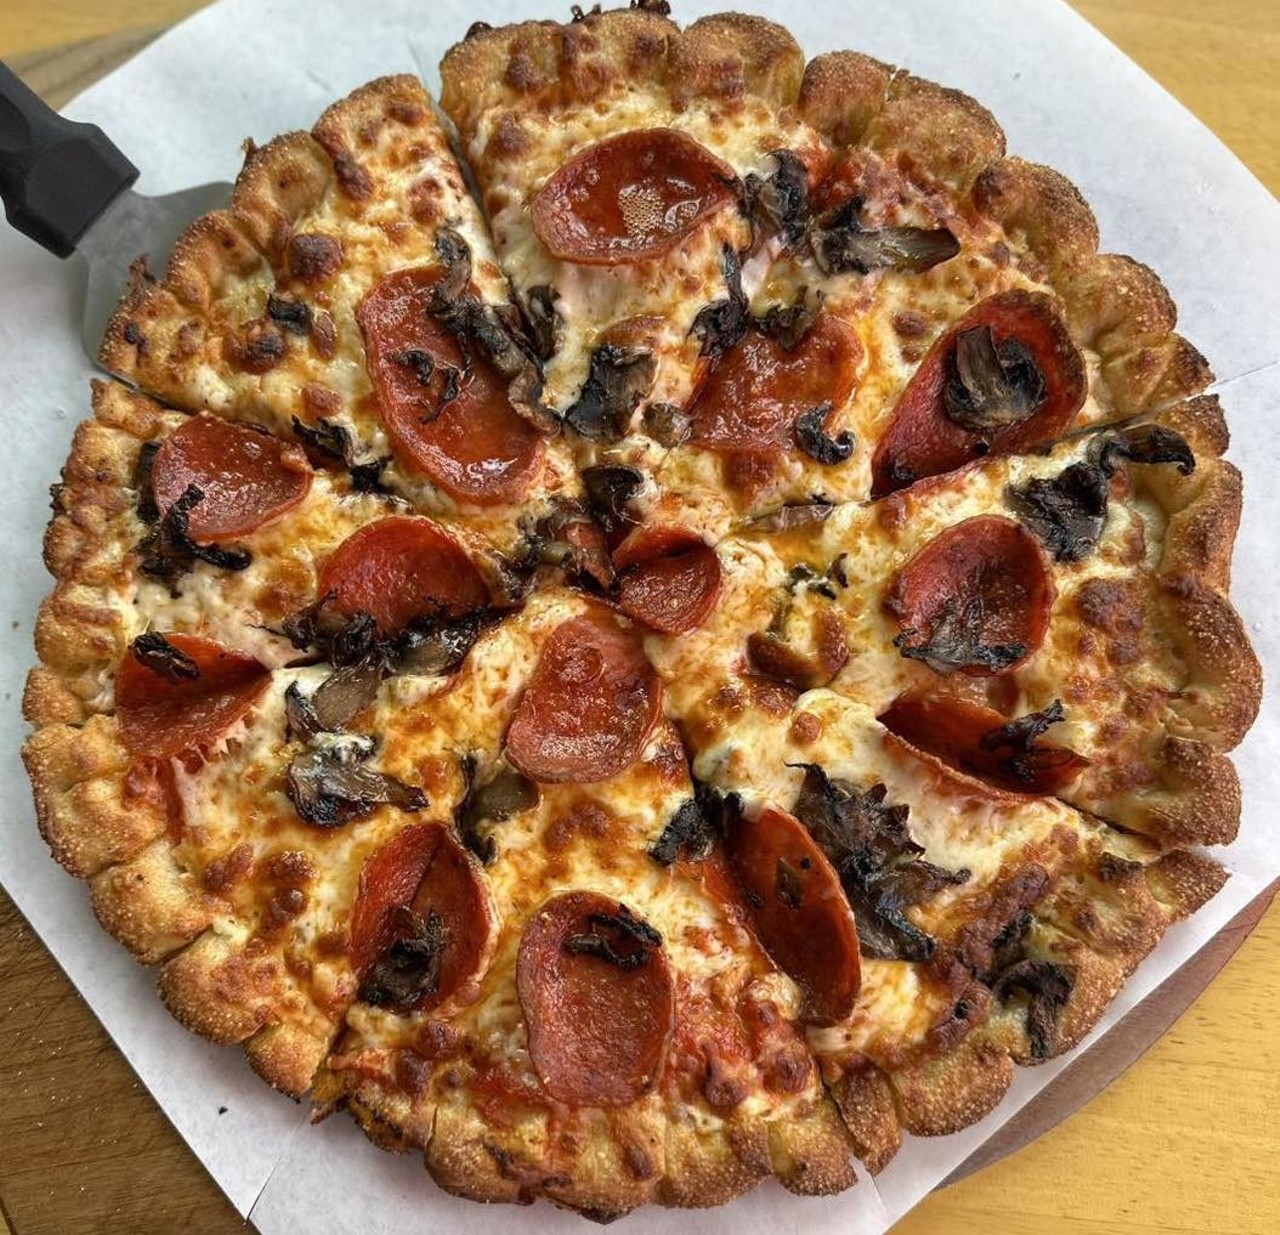  Big M
153 Lear Rd., Avon Lake and 7501 Carnegie Ave., Cleveland (Central Kitchen)
Big M Pizza is offering their 10 inch Founders Special pizza with thin crust, pepperoni, and mushrooms with a balsamic red sauce. +$5 for cauliflower crust. Gluten free available.